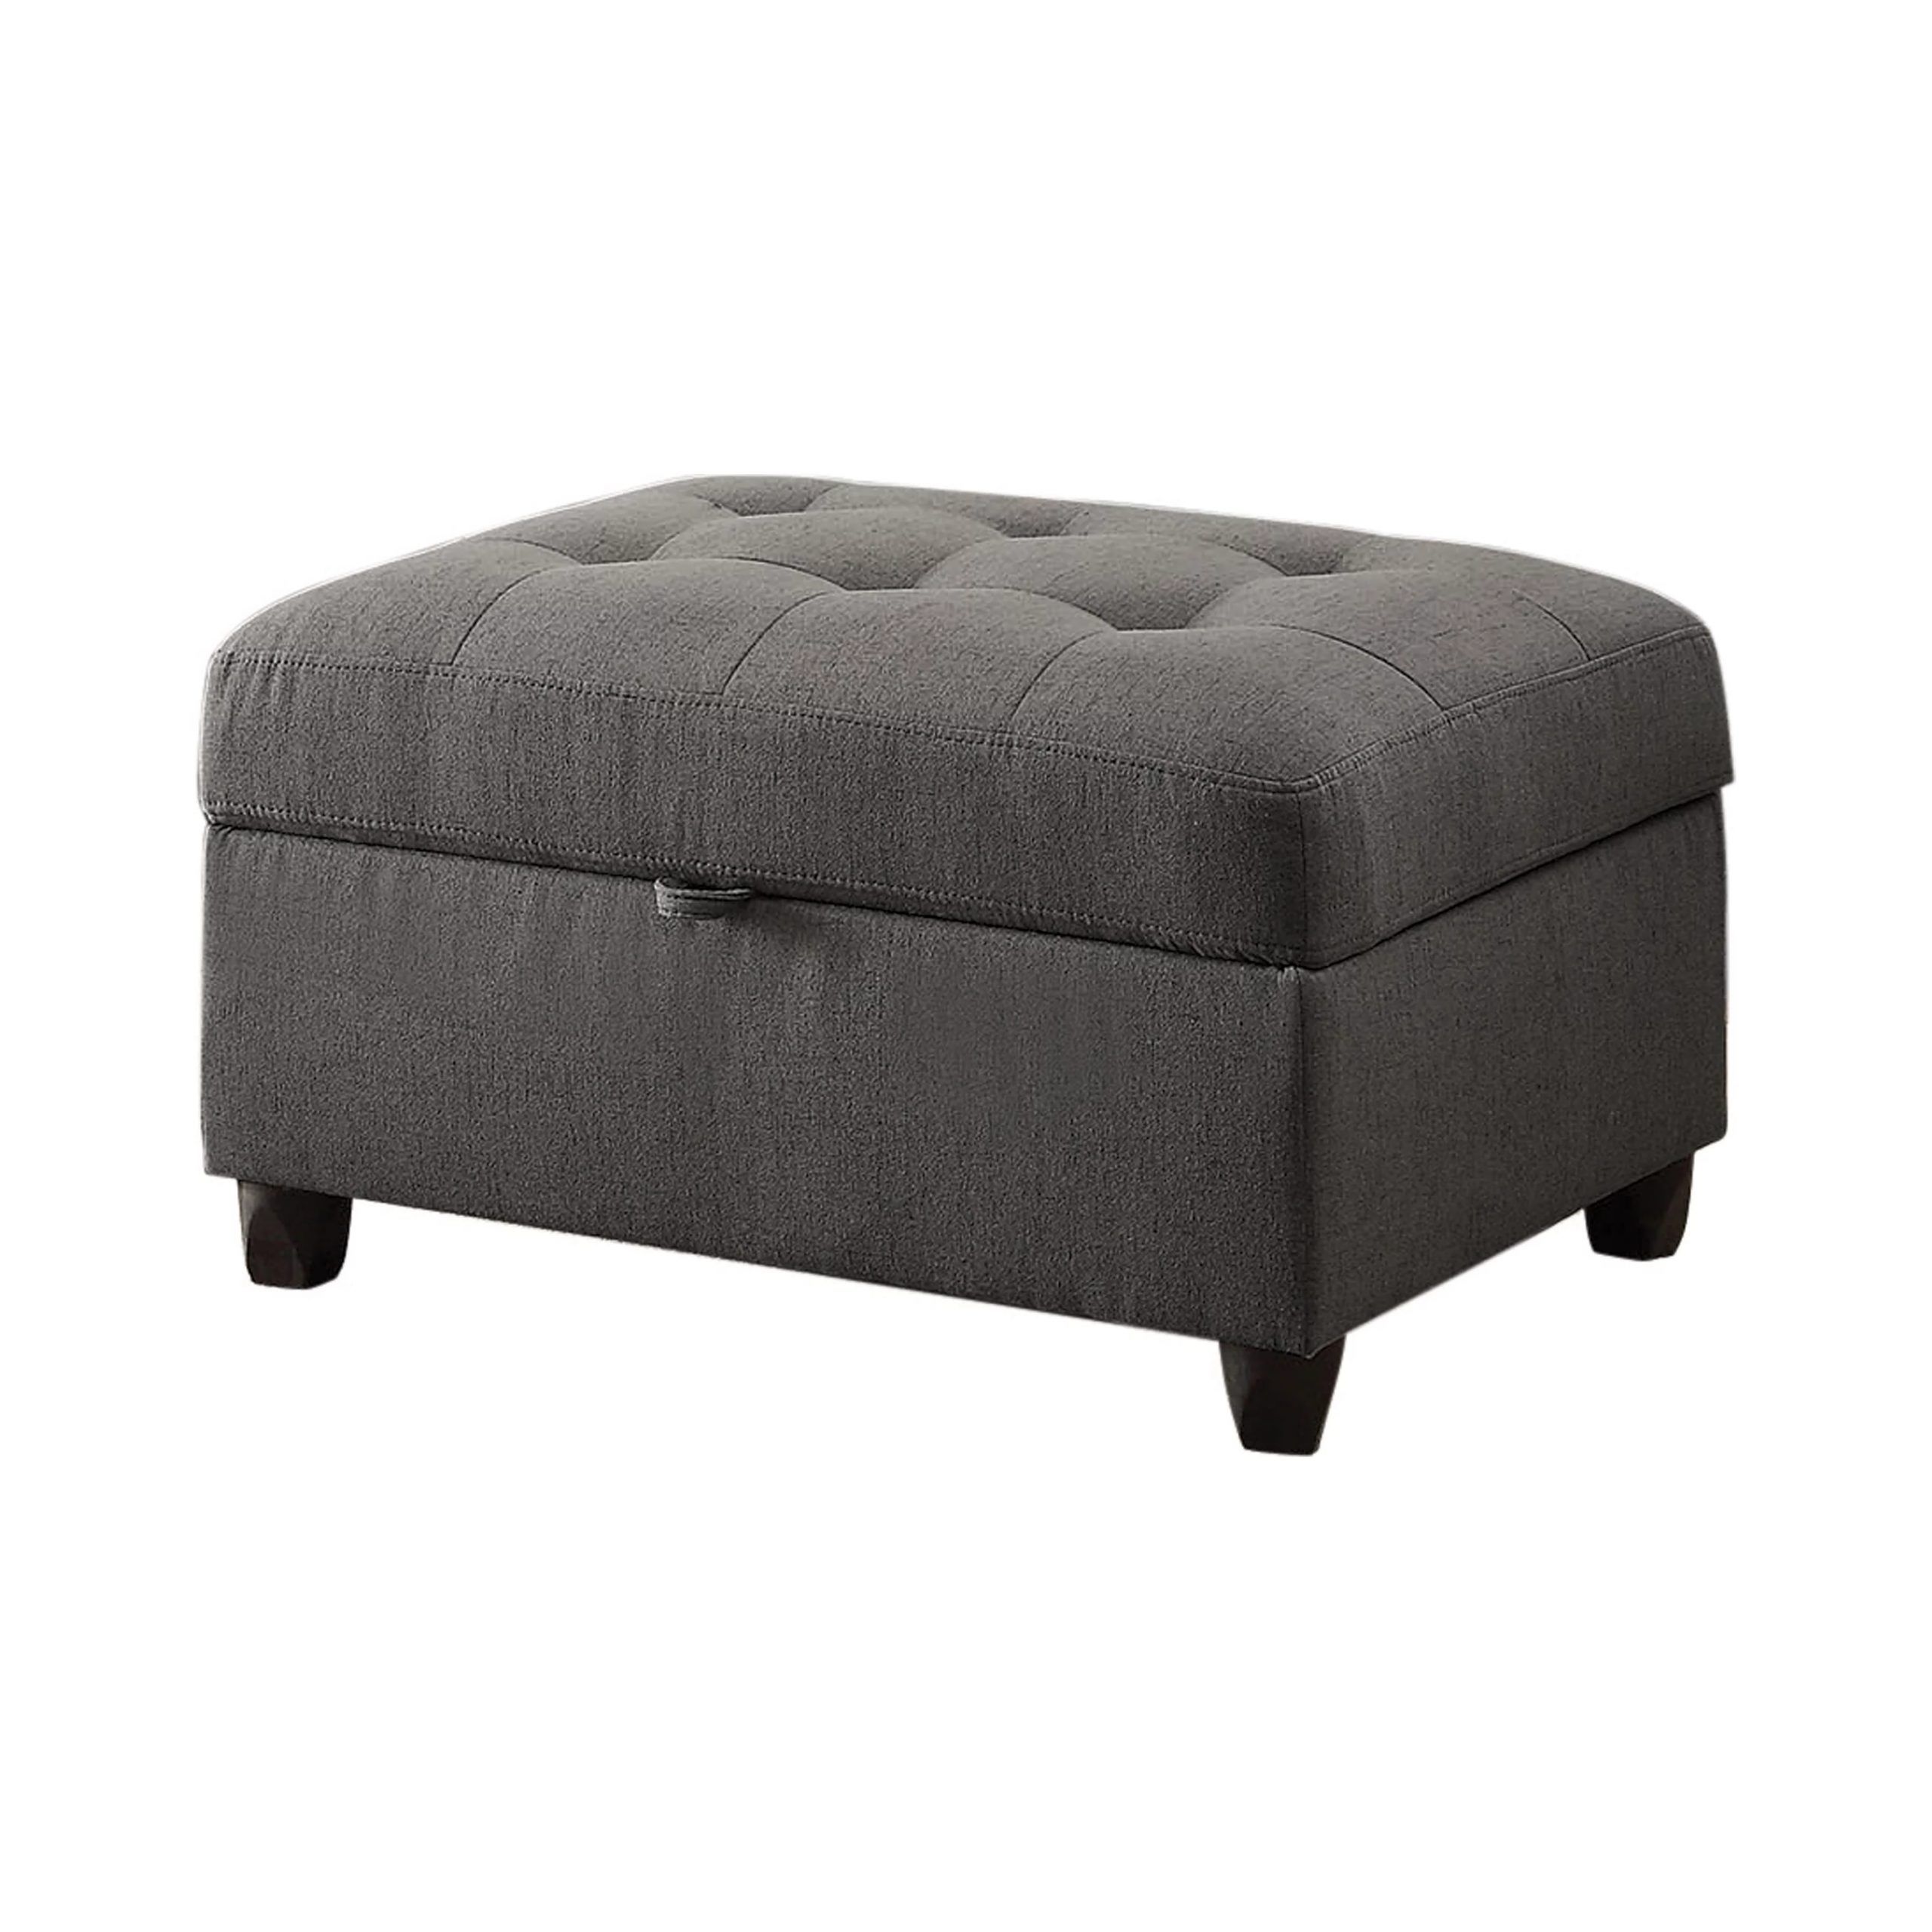 Widely Used Stonenesse Tufted Storage Ottoman Grey – Walmart – Walmart In Brown And Gray Button Tufted Ottomans (View 3 of 10)